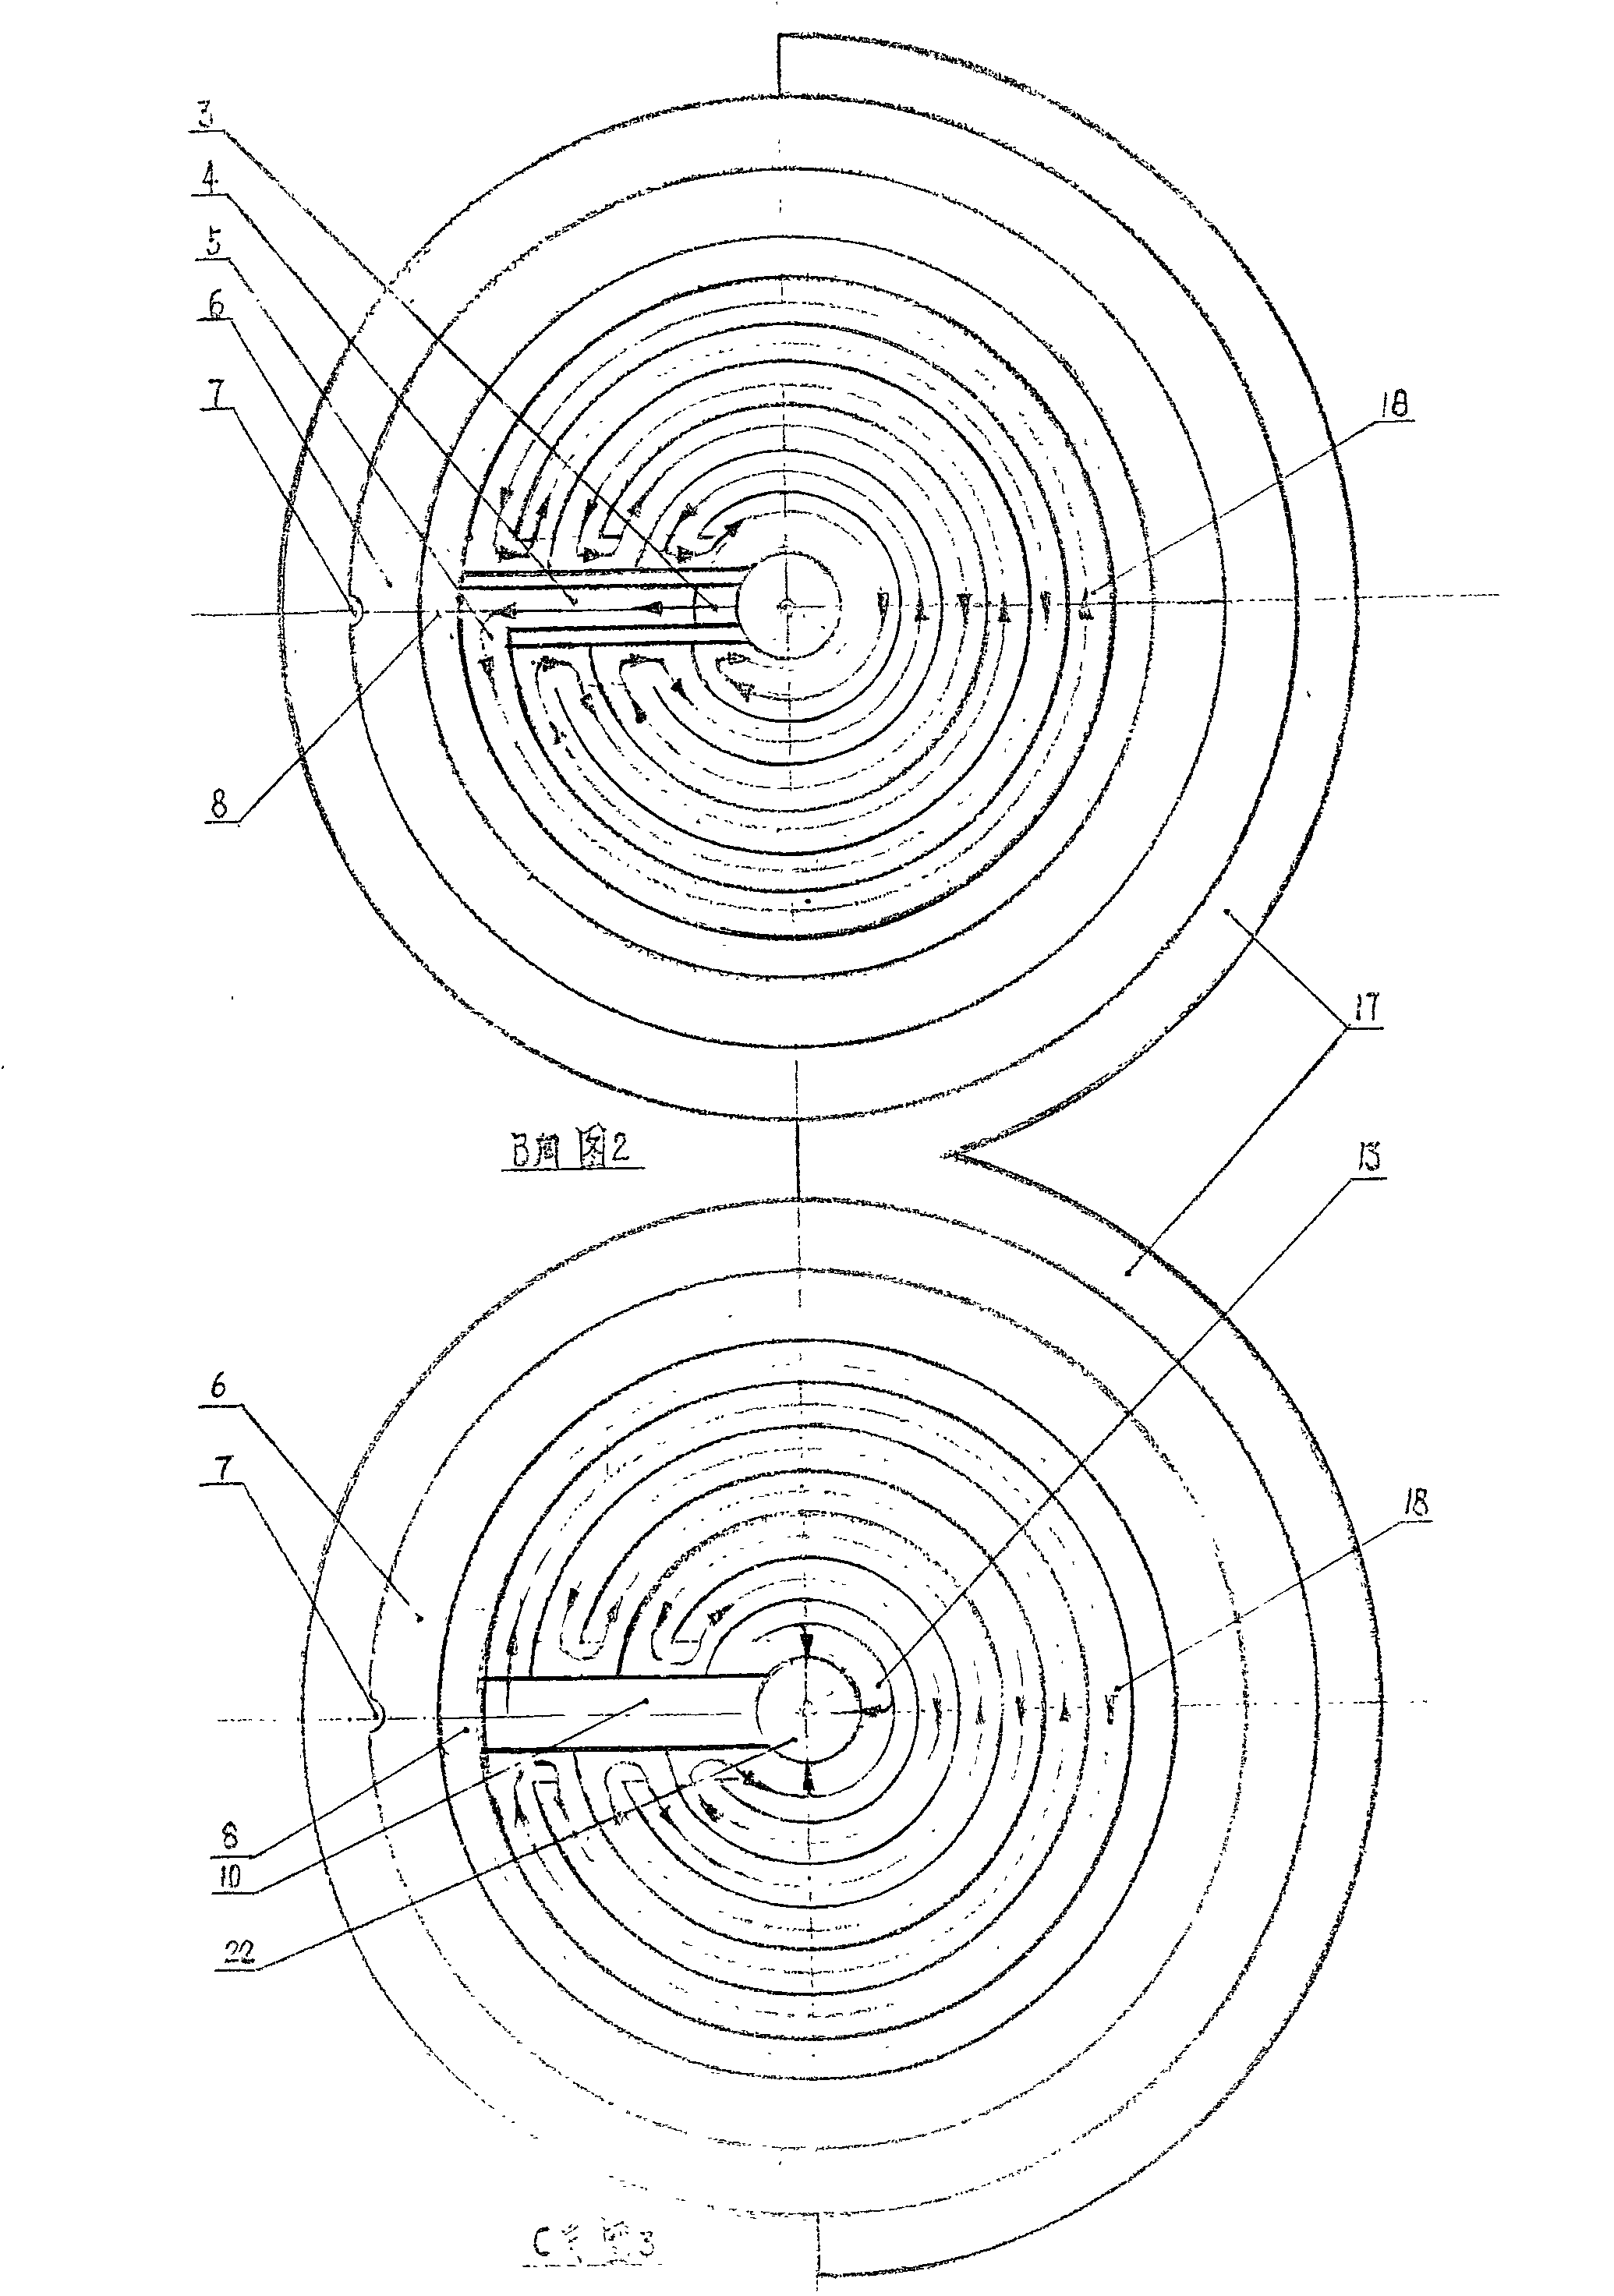 Solvent filter with incense-coiled flow passes